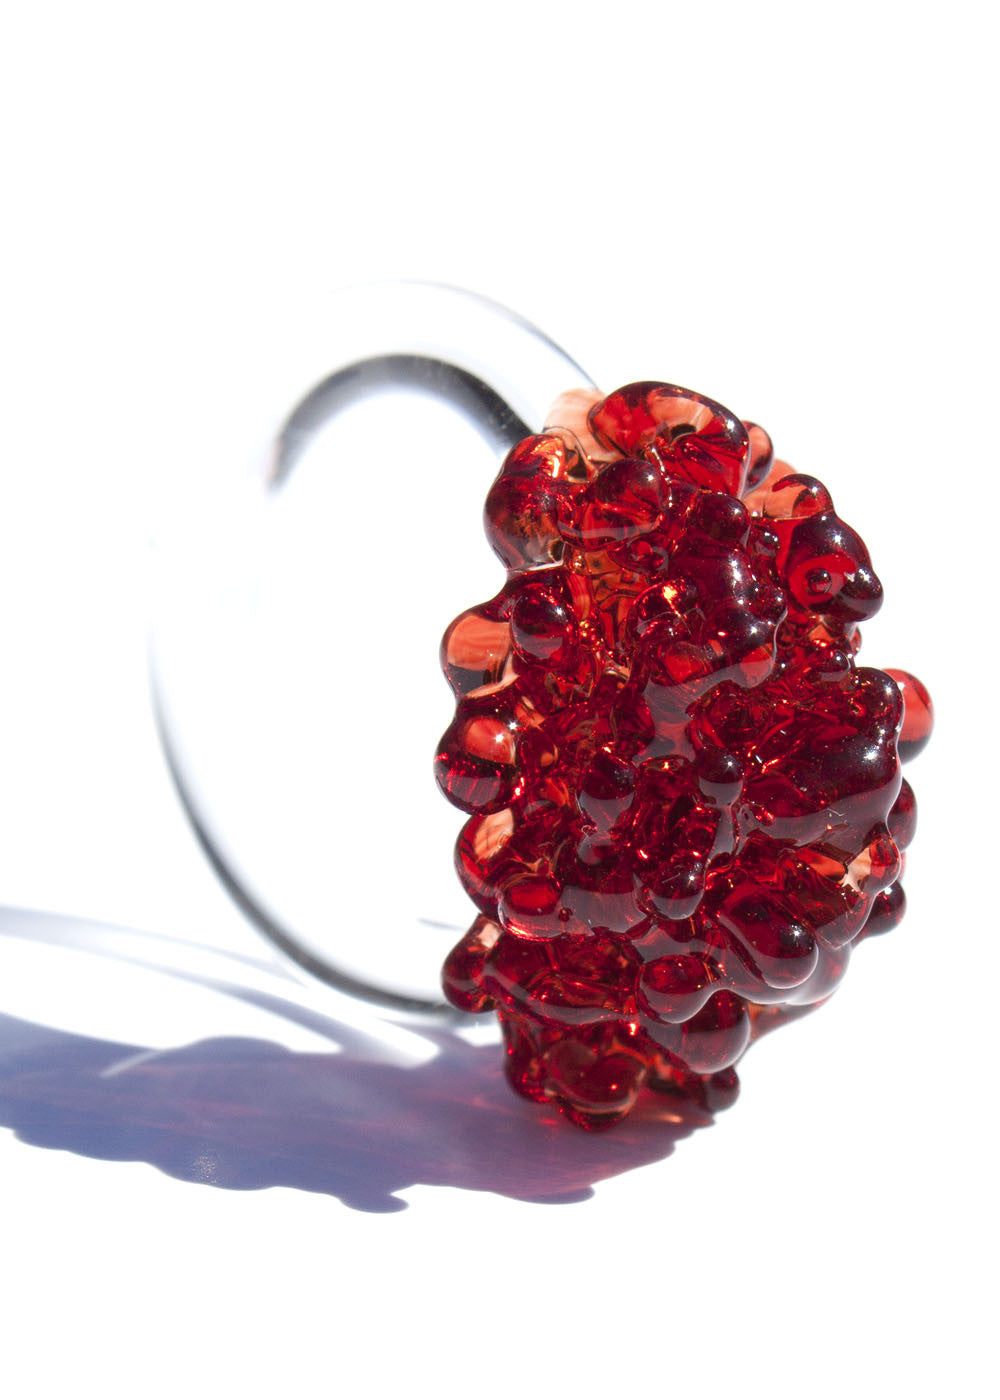 Glass Cluster Ring - Pomegranate